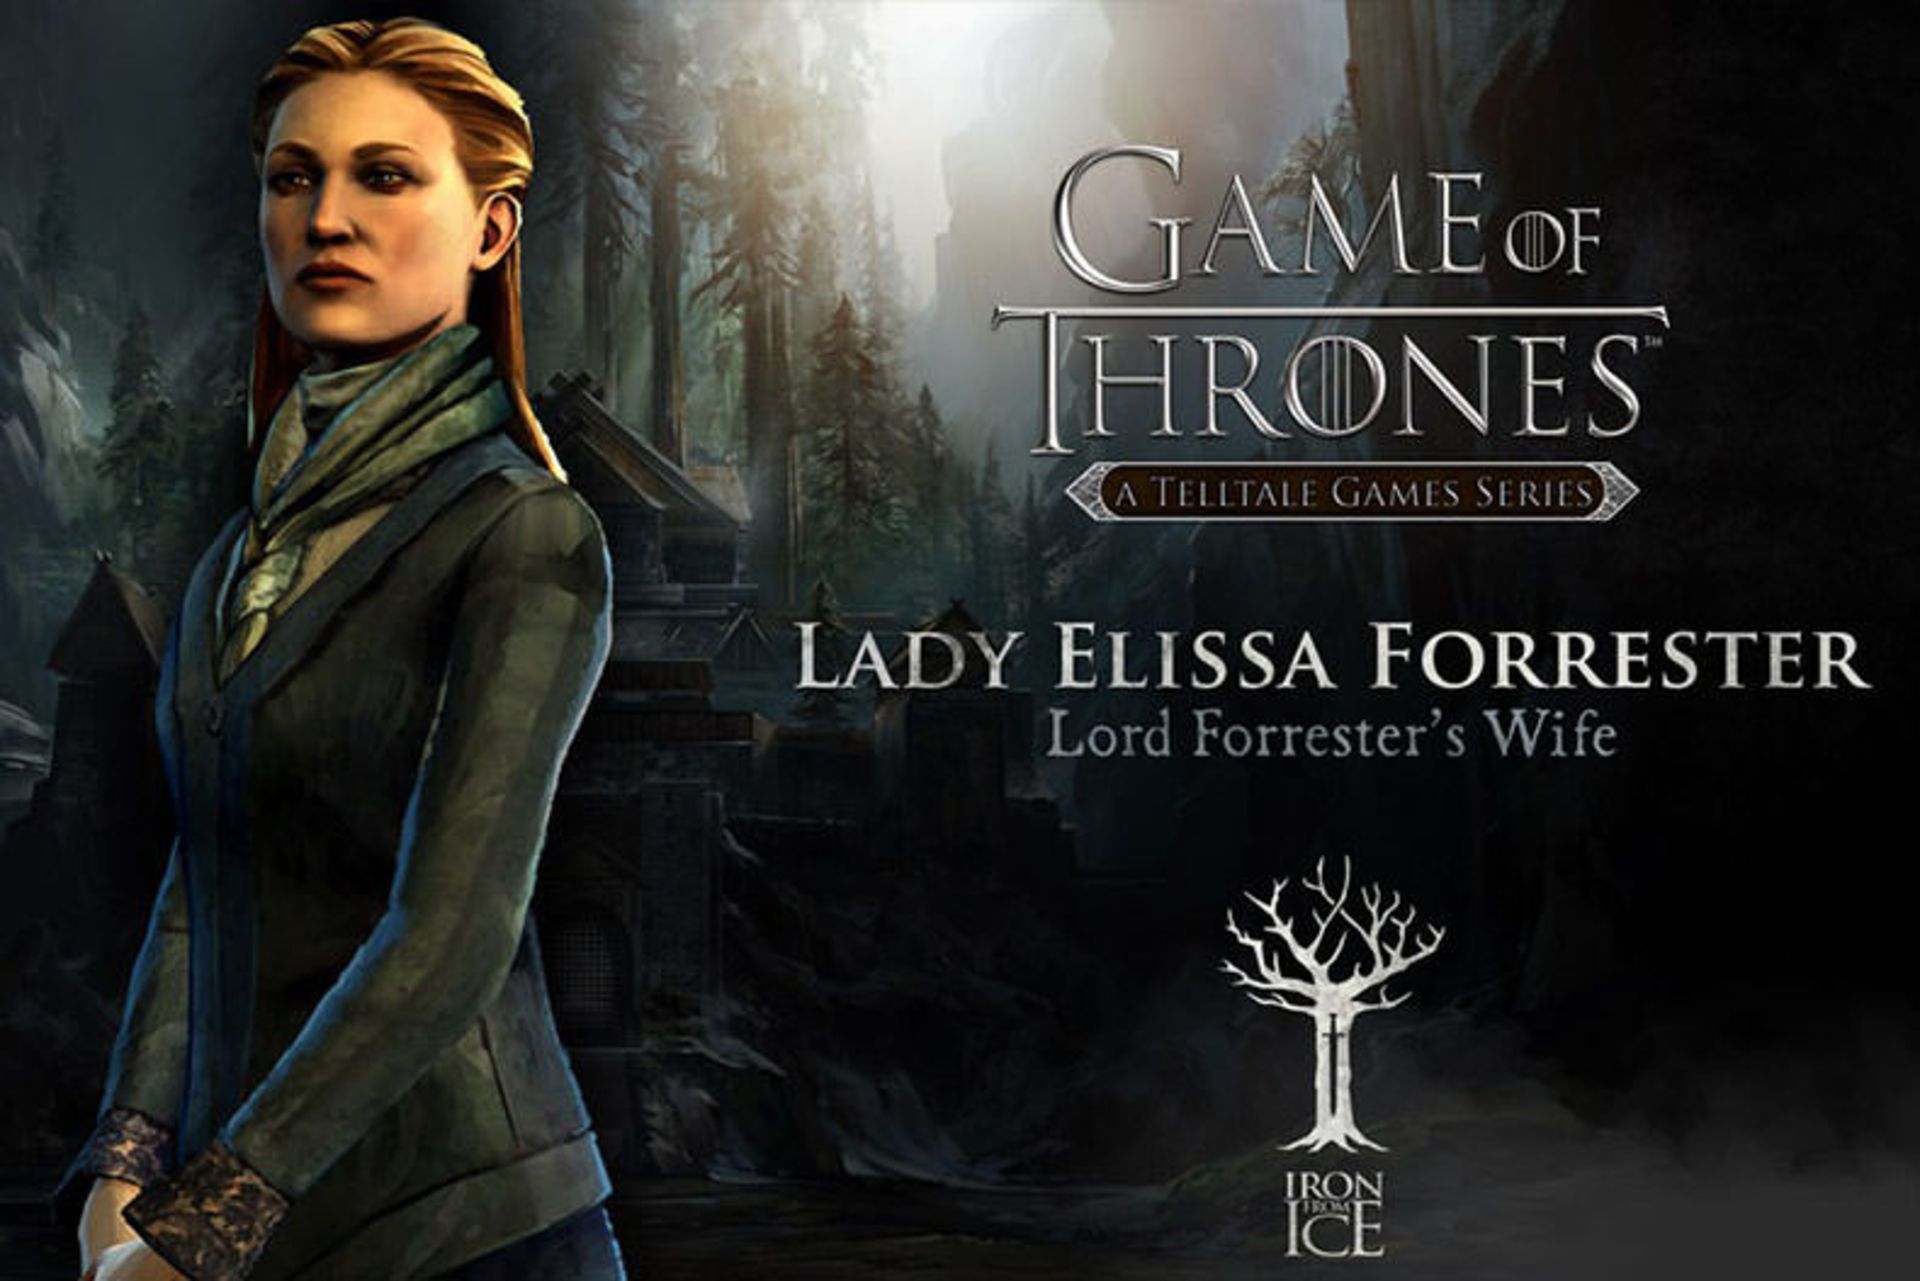 Game-of-Thrones-A-Telltale-Games-Series-790